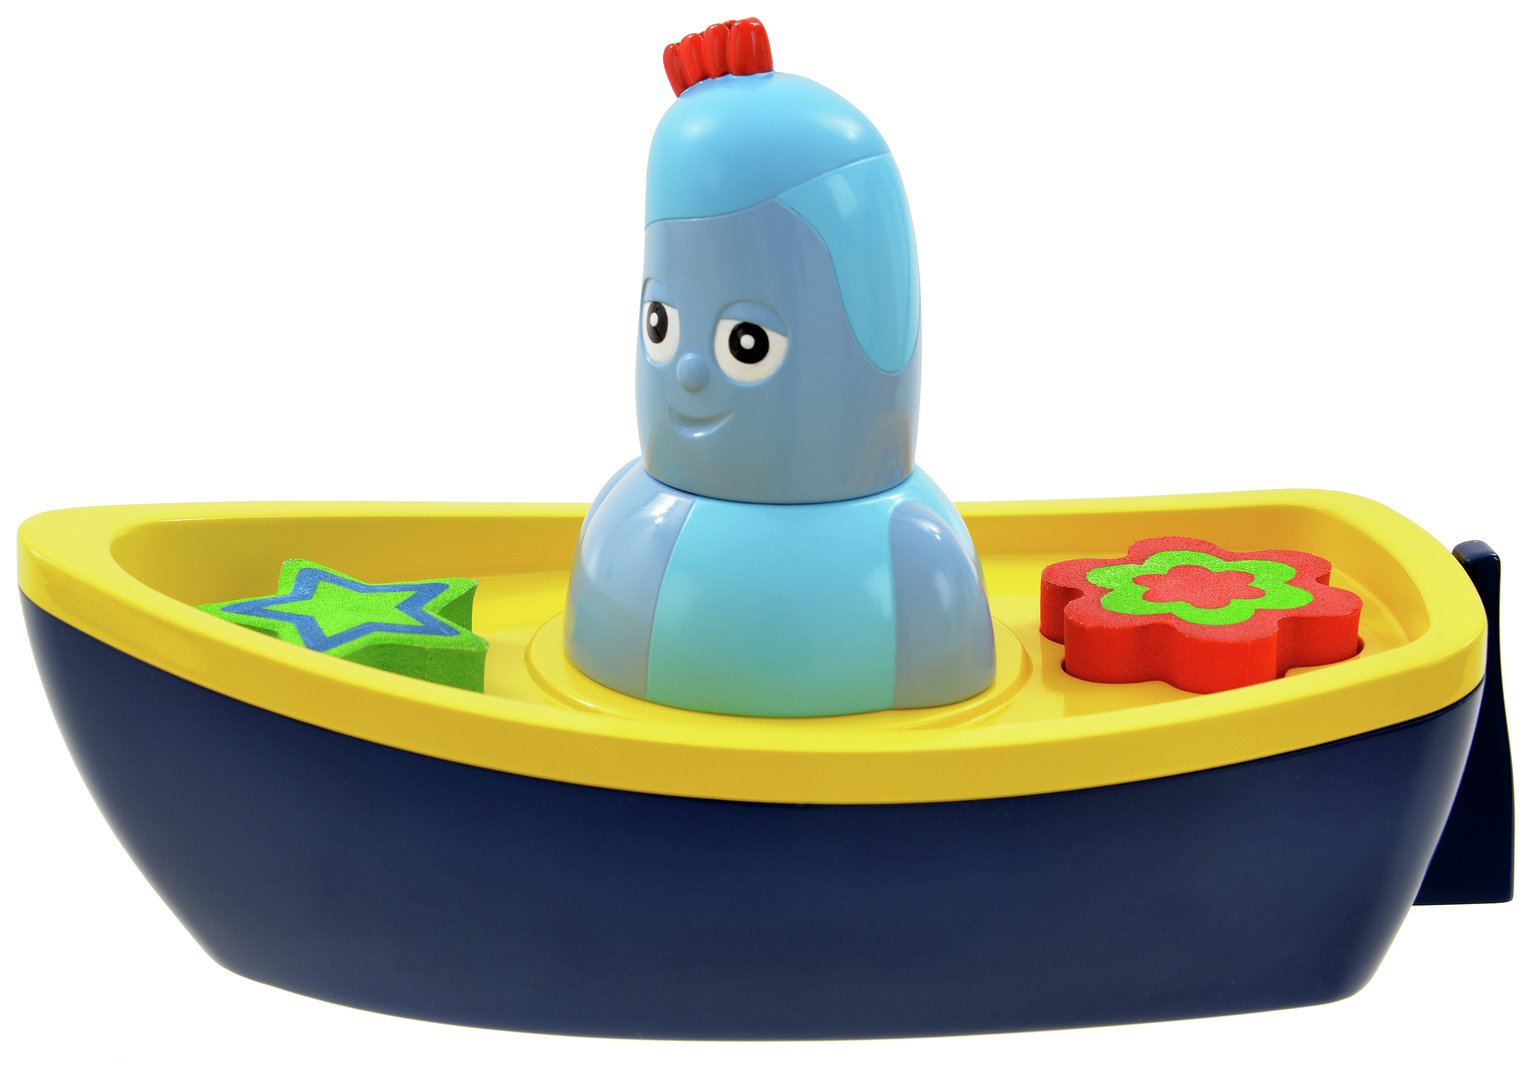 In The Night Garden Iggle Piggle's Lightshow Bath Time Boat